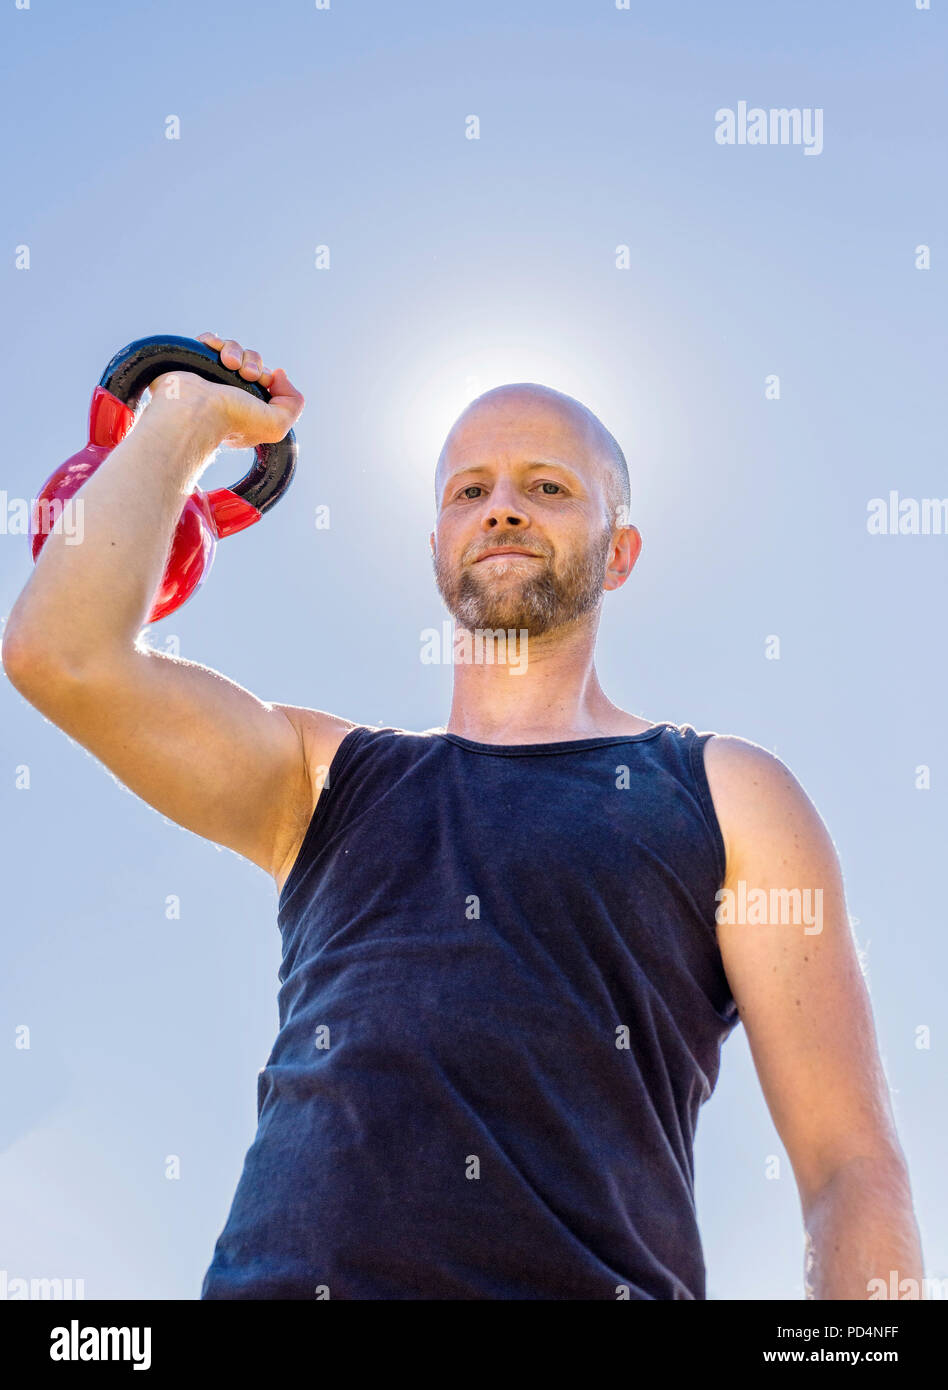 A young man training with Kettle Bells outdoors Stock Photo